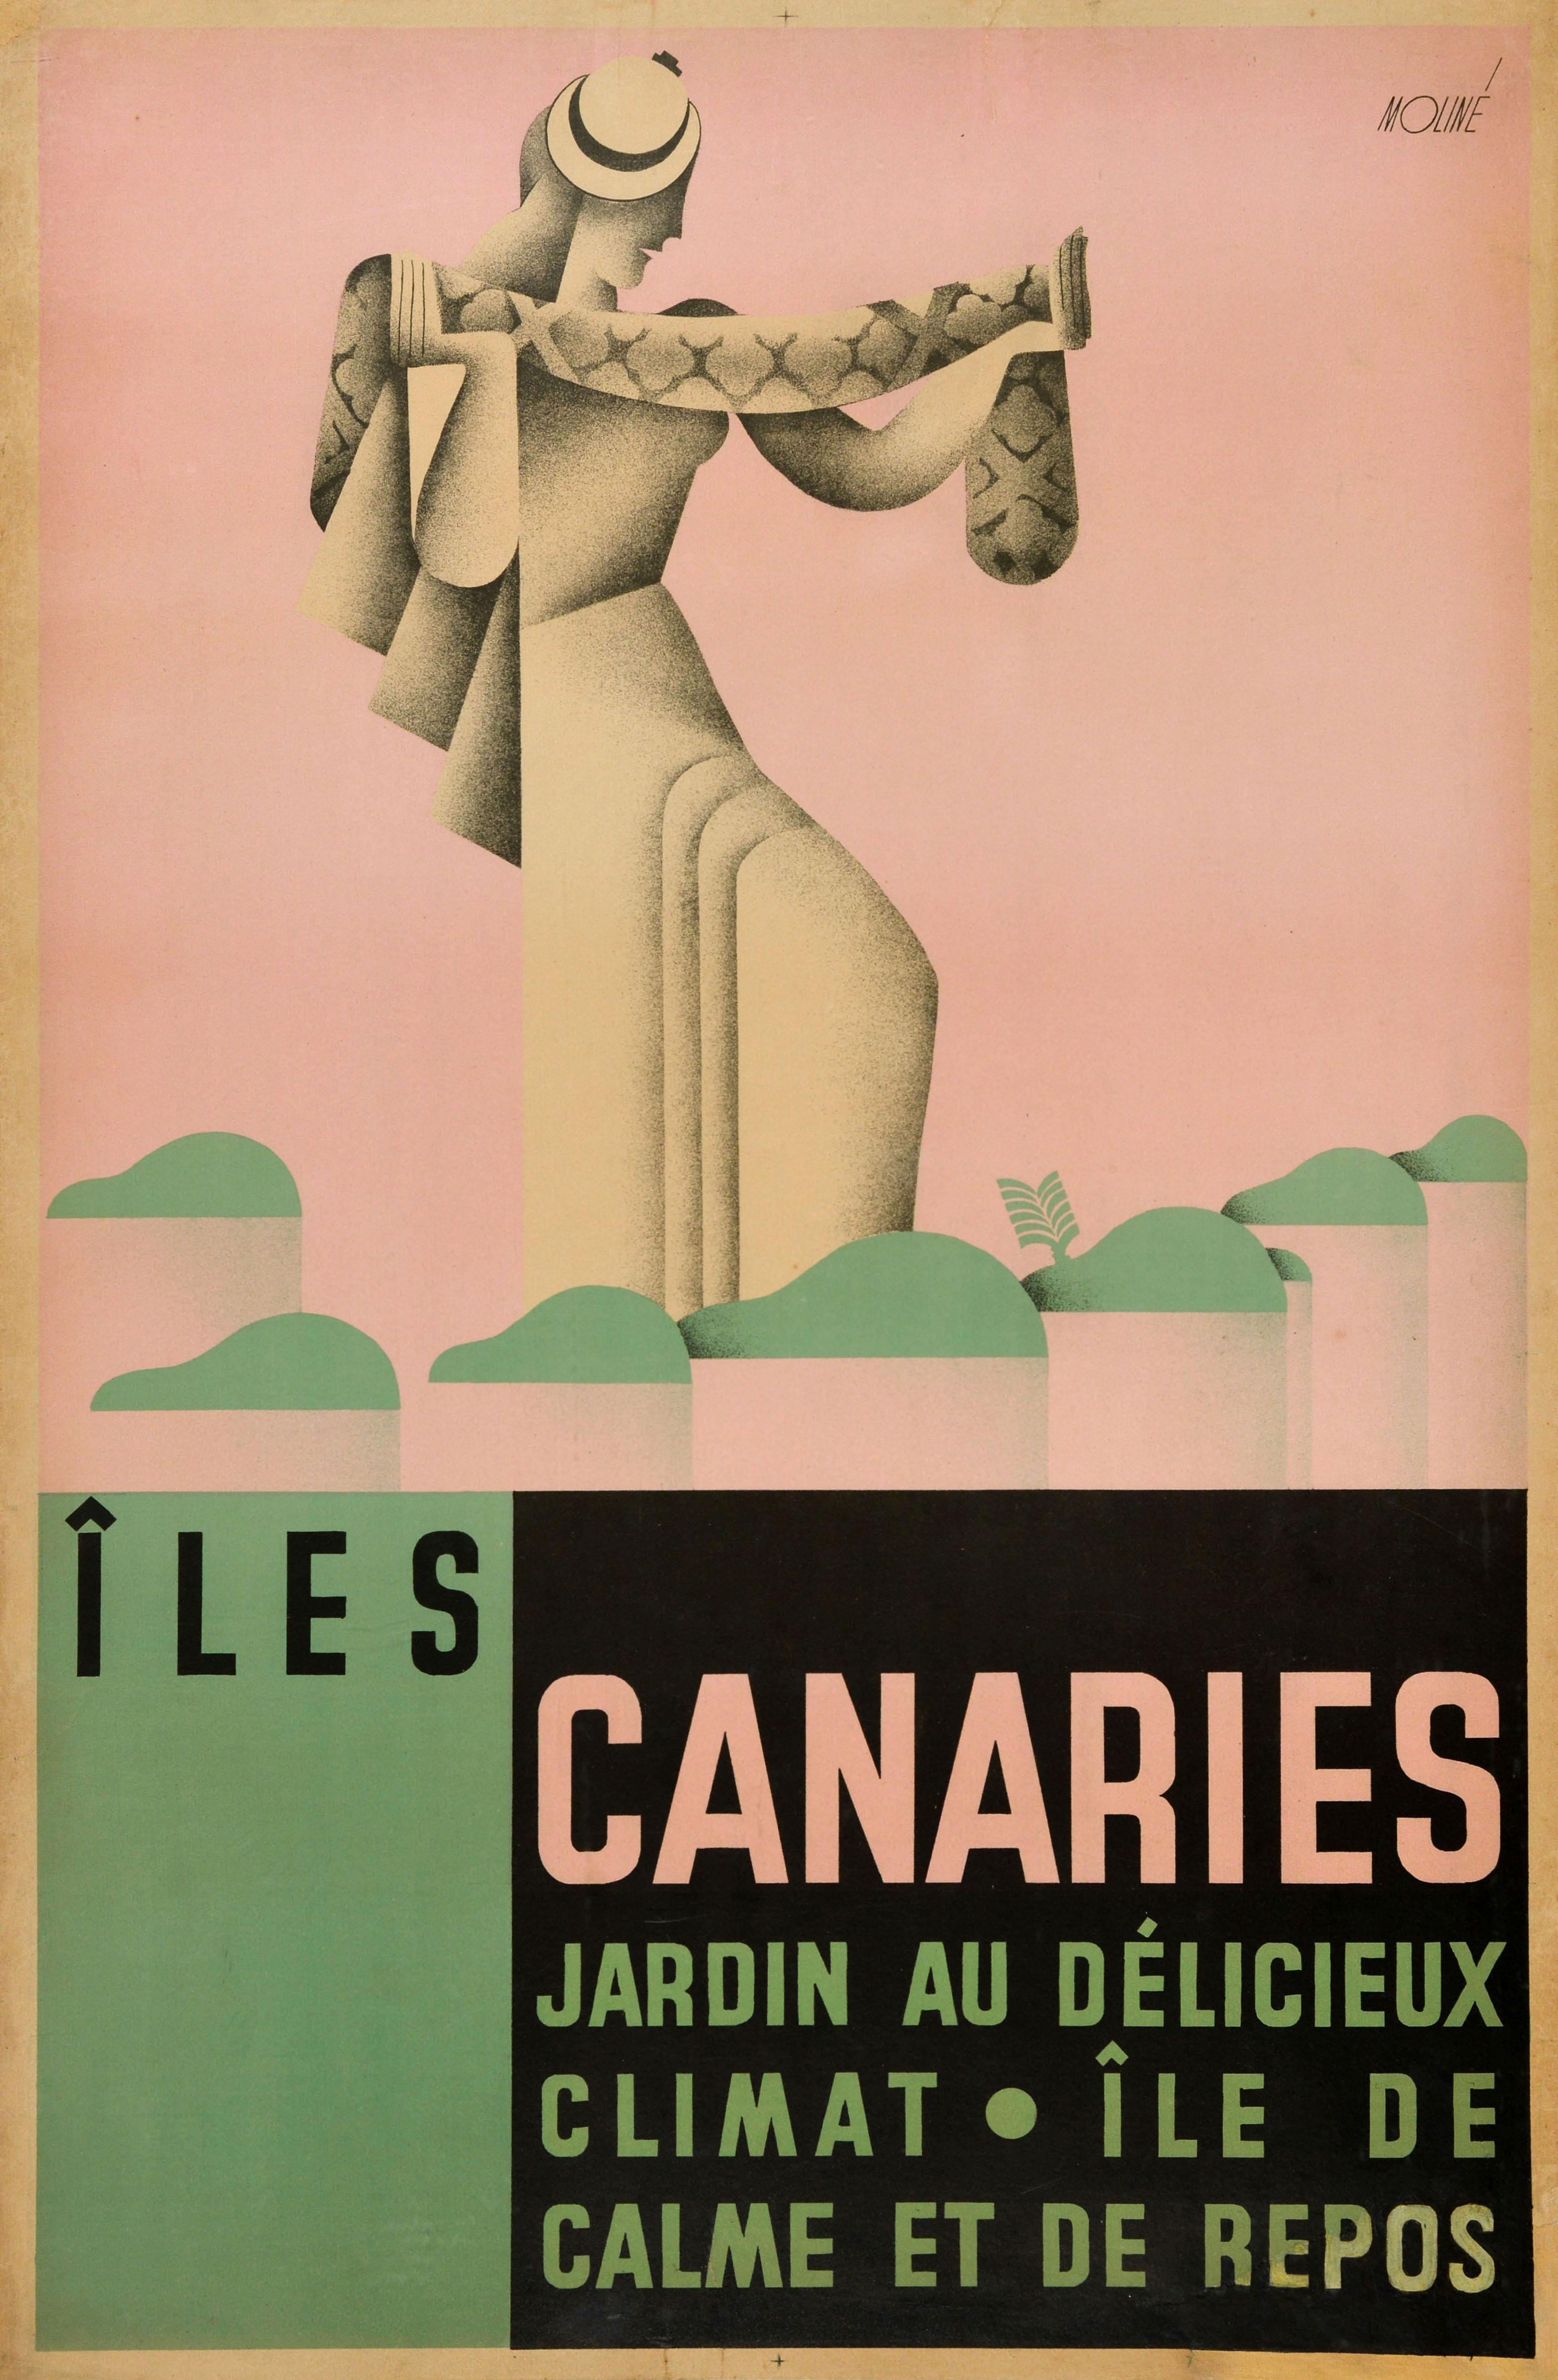 Unknown Print - Original Vintage Travel Poster Canary Islands Iles Canaries Canarias Spain Art